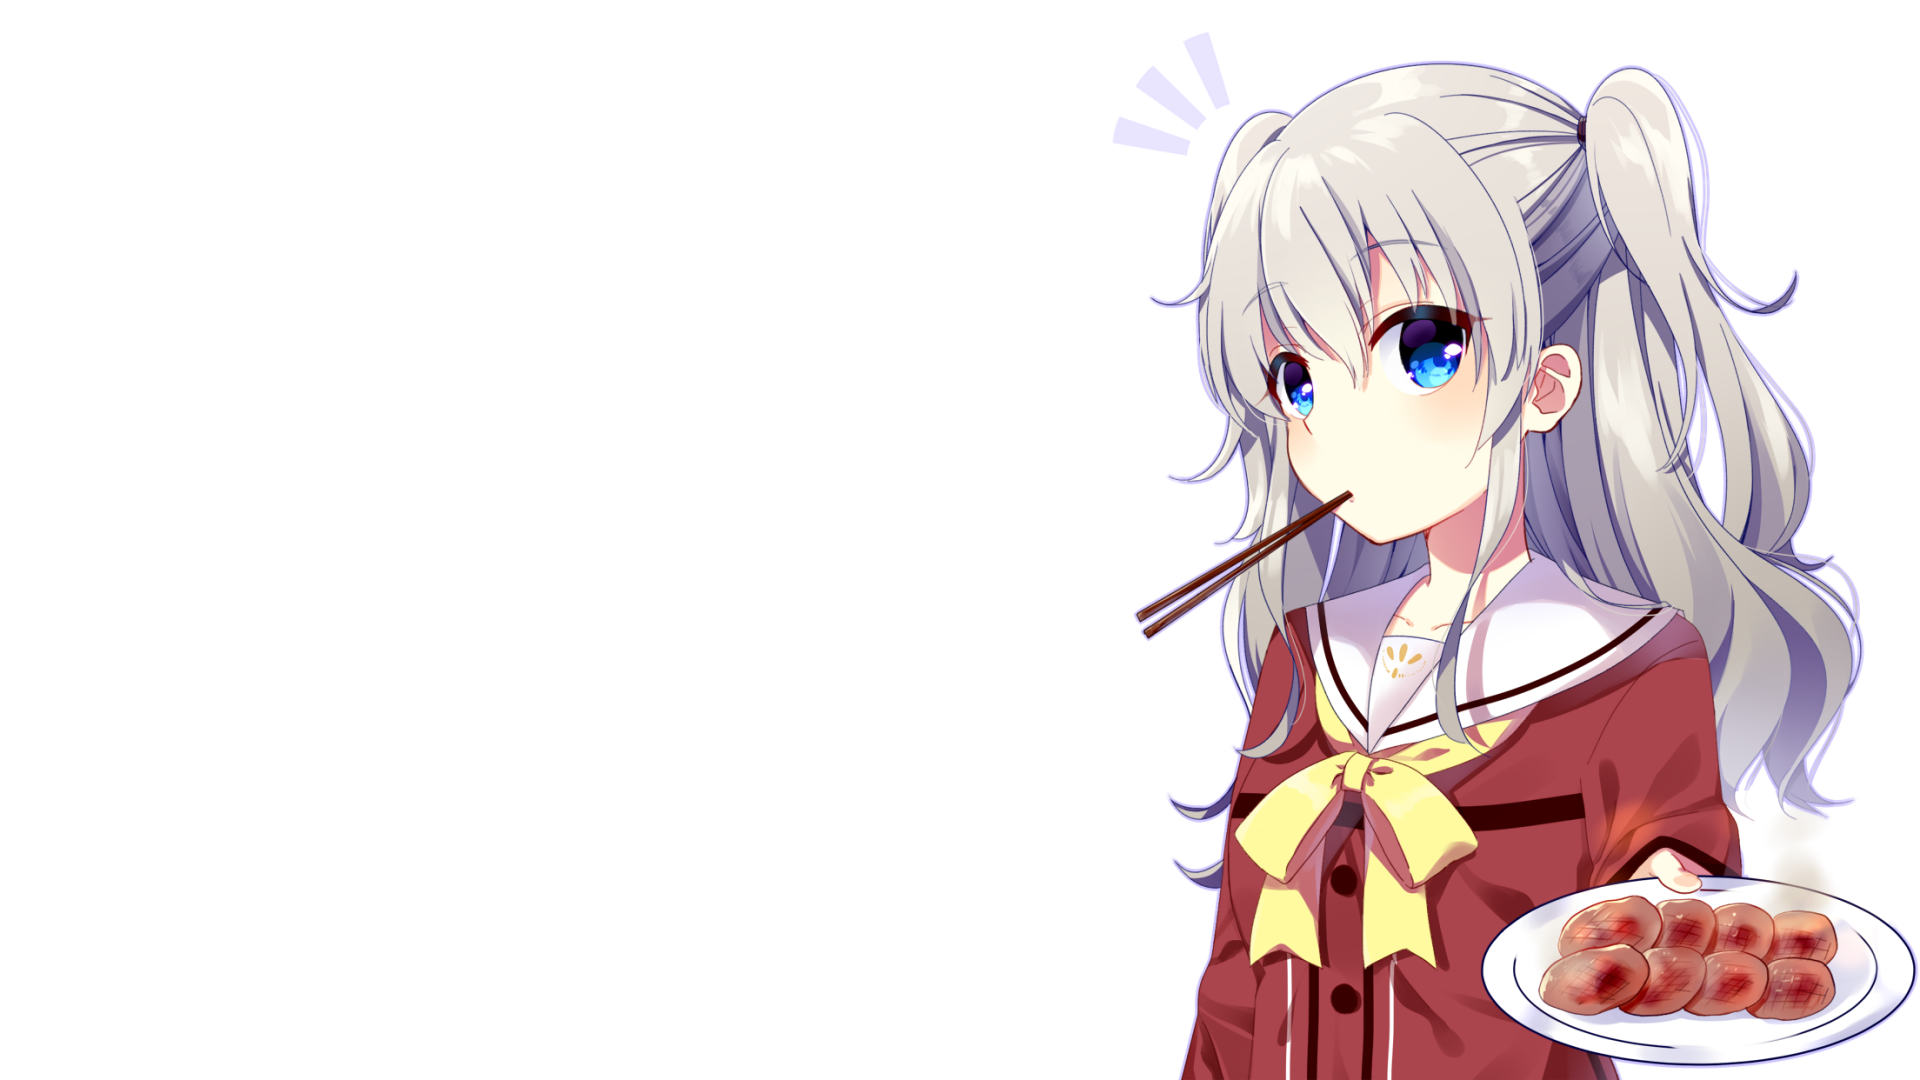 Hd Anime Backgrounds Png & Free Hd Anime Backgrounds.png Transparent Image